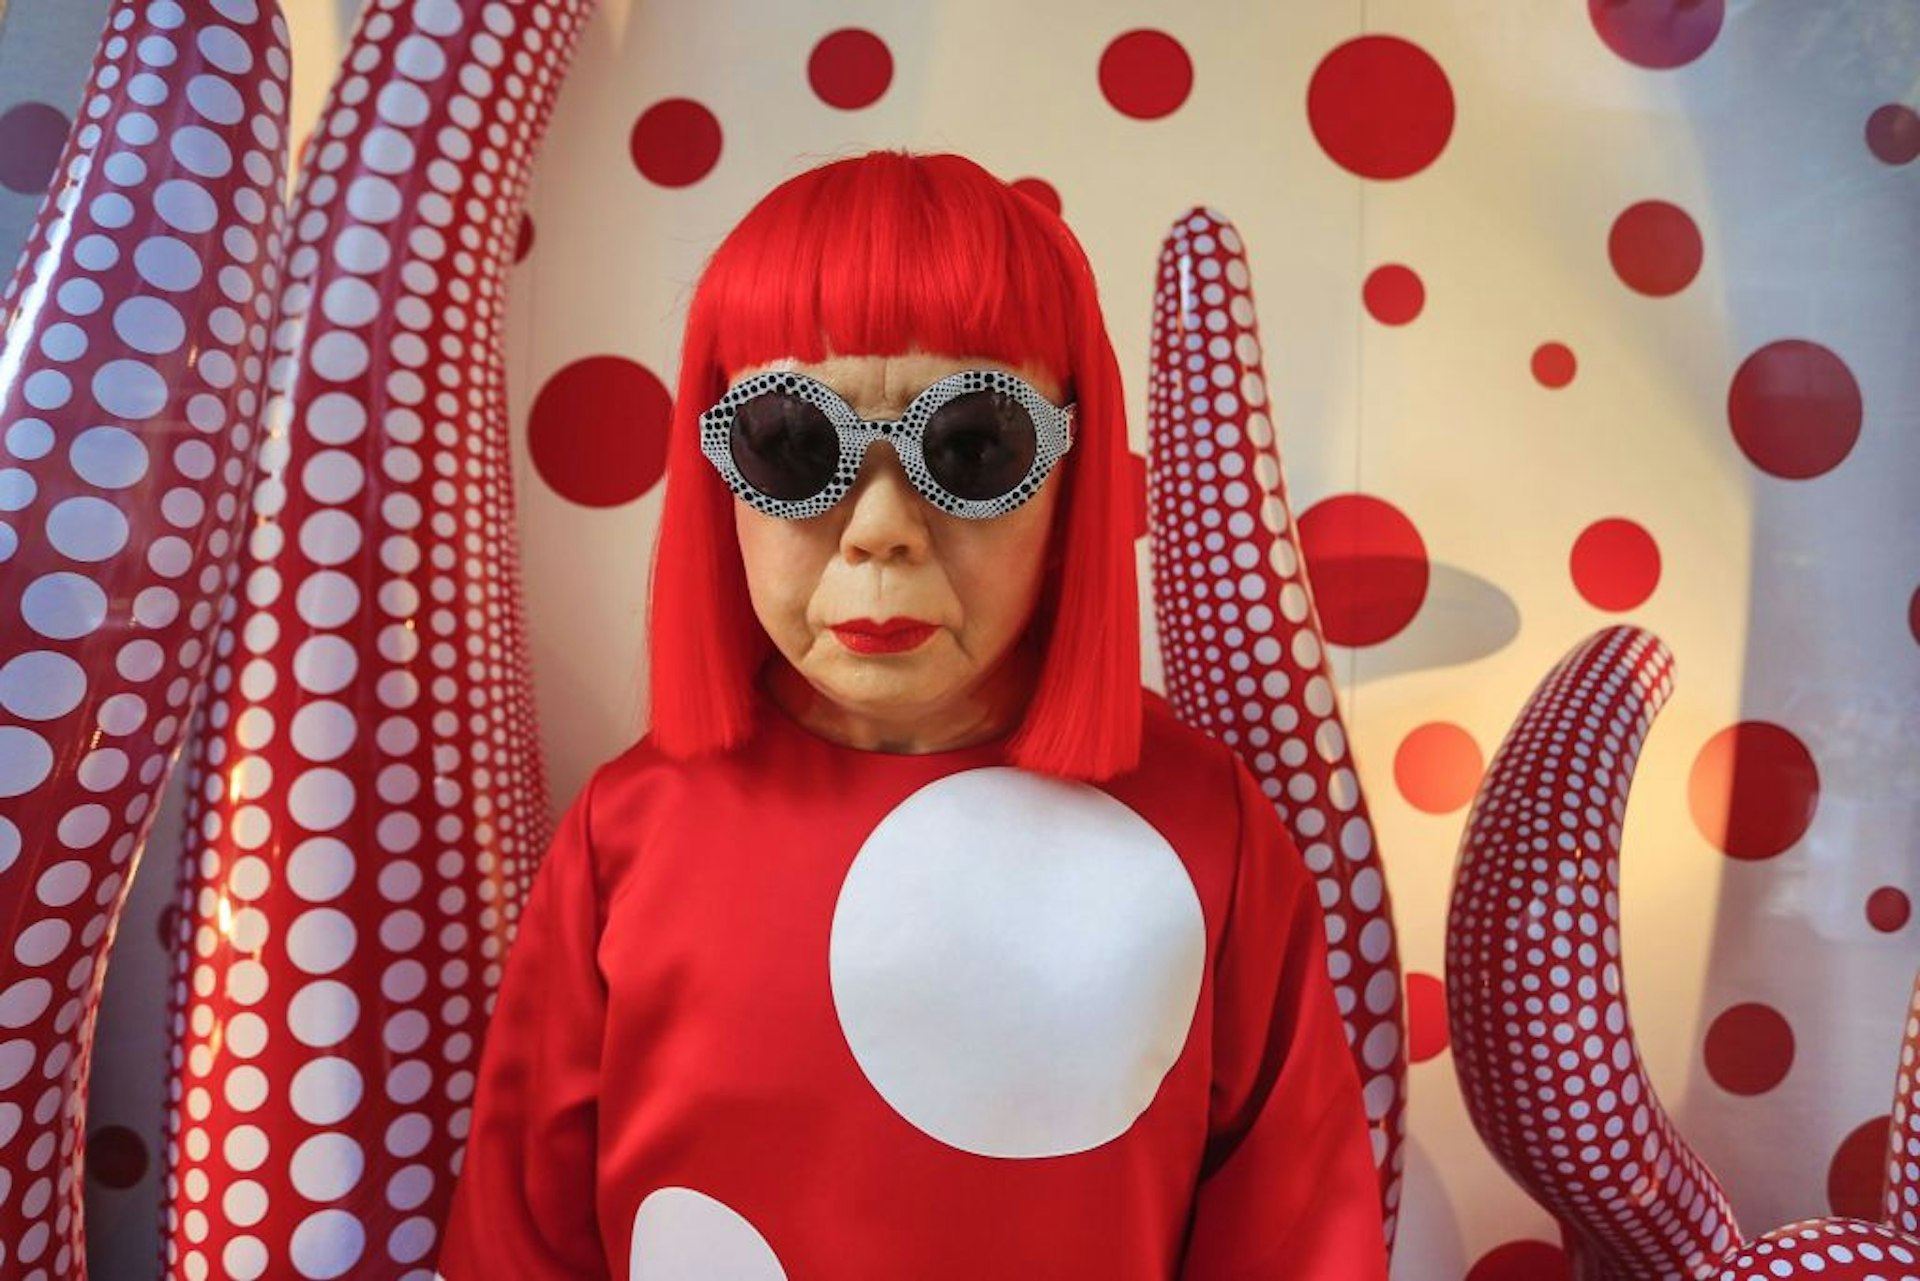 A portrait of Yayoi Kusama, with red hair and googles, in front of her signature polka dot art. 